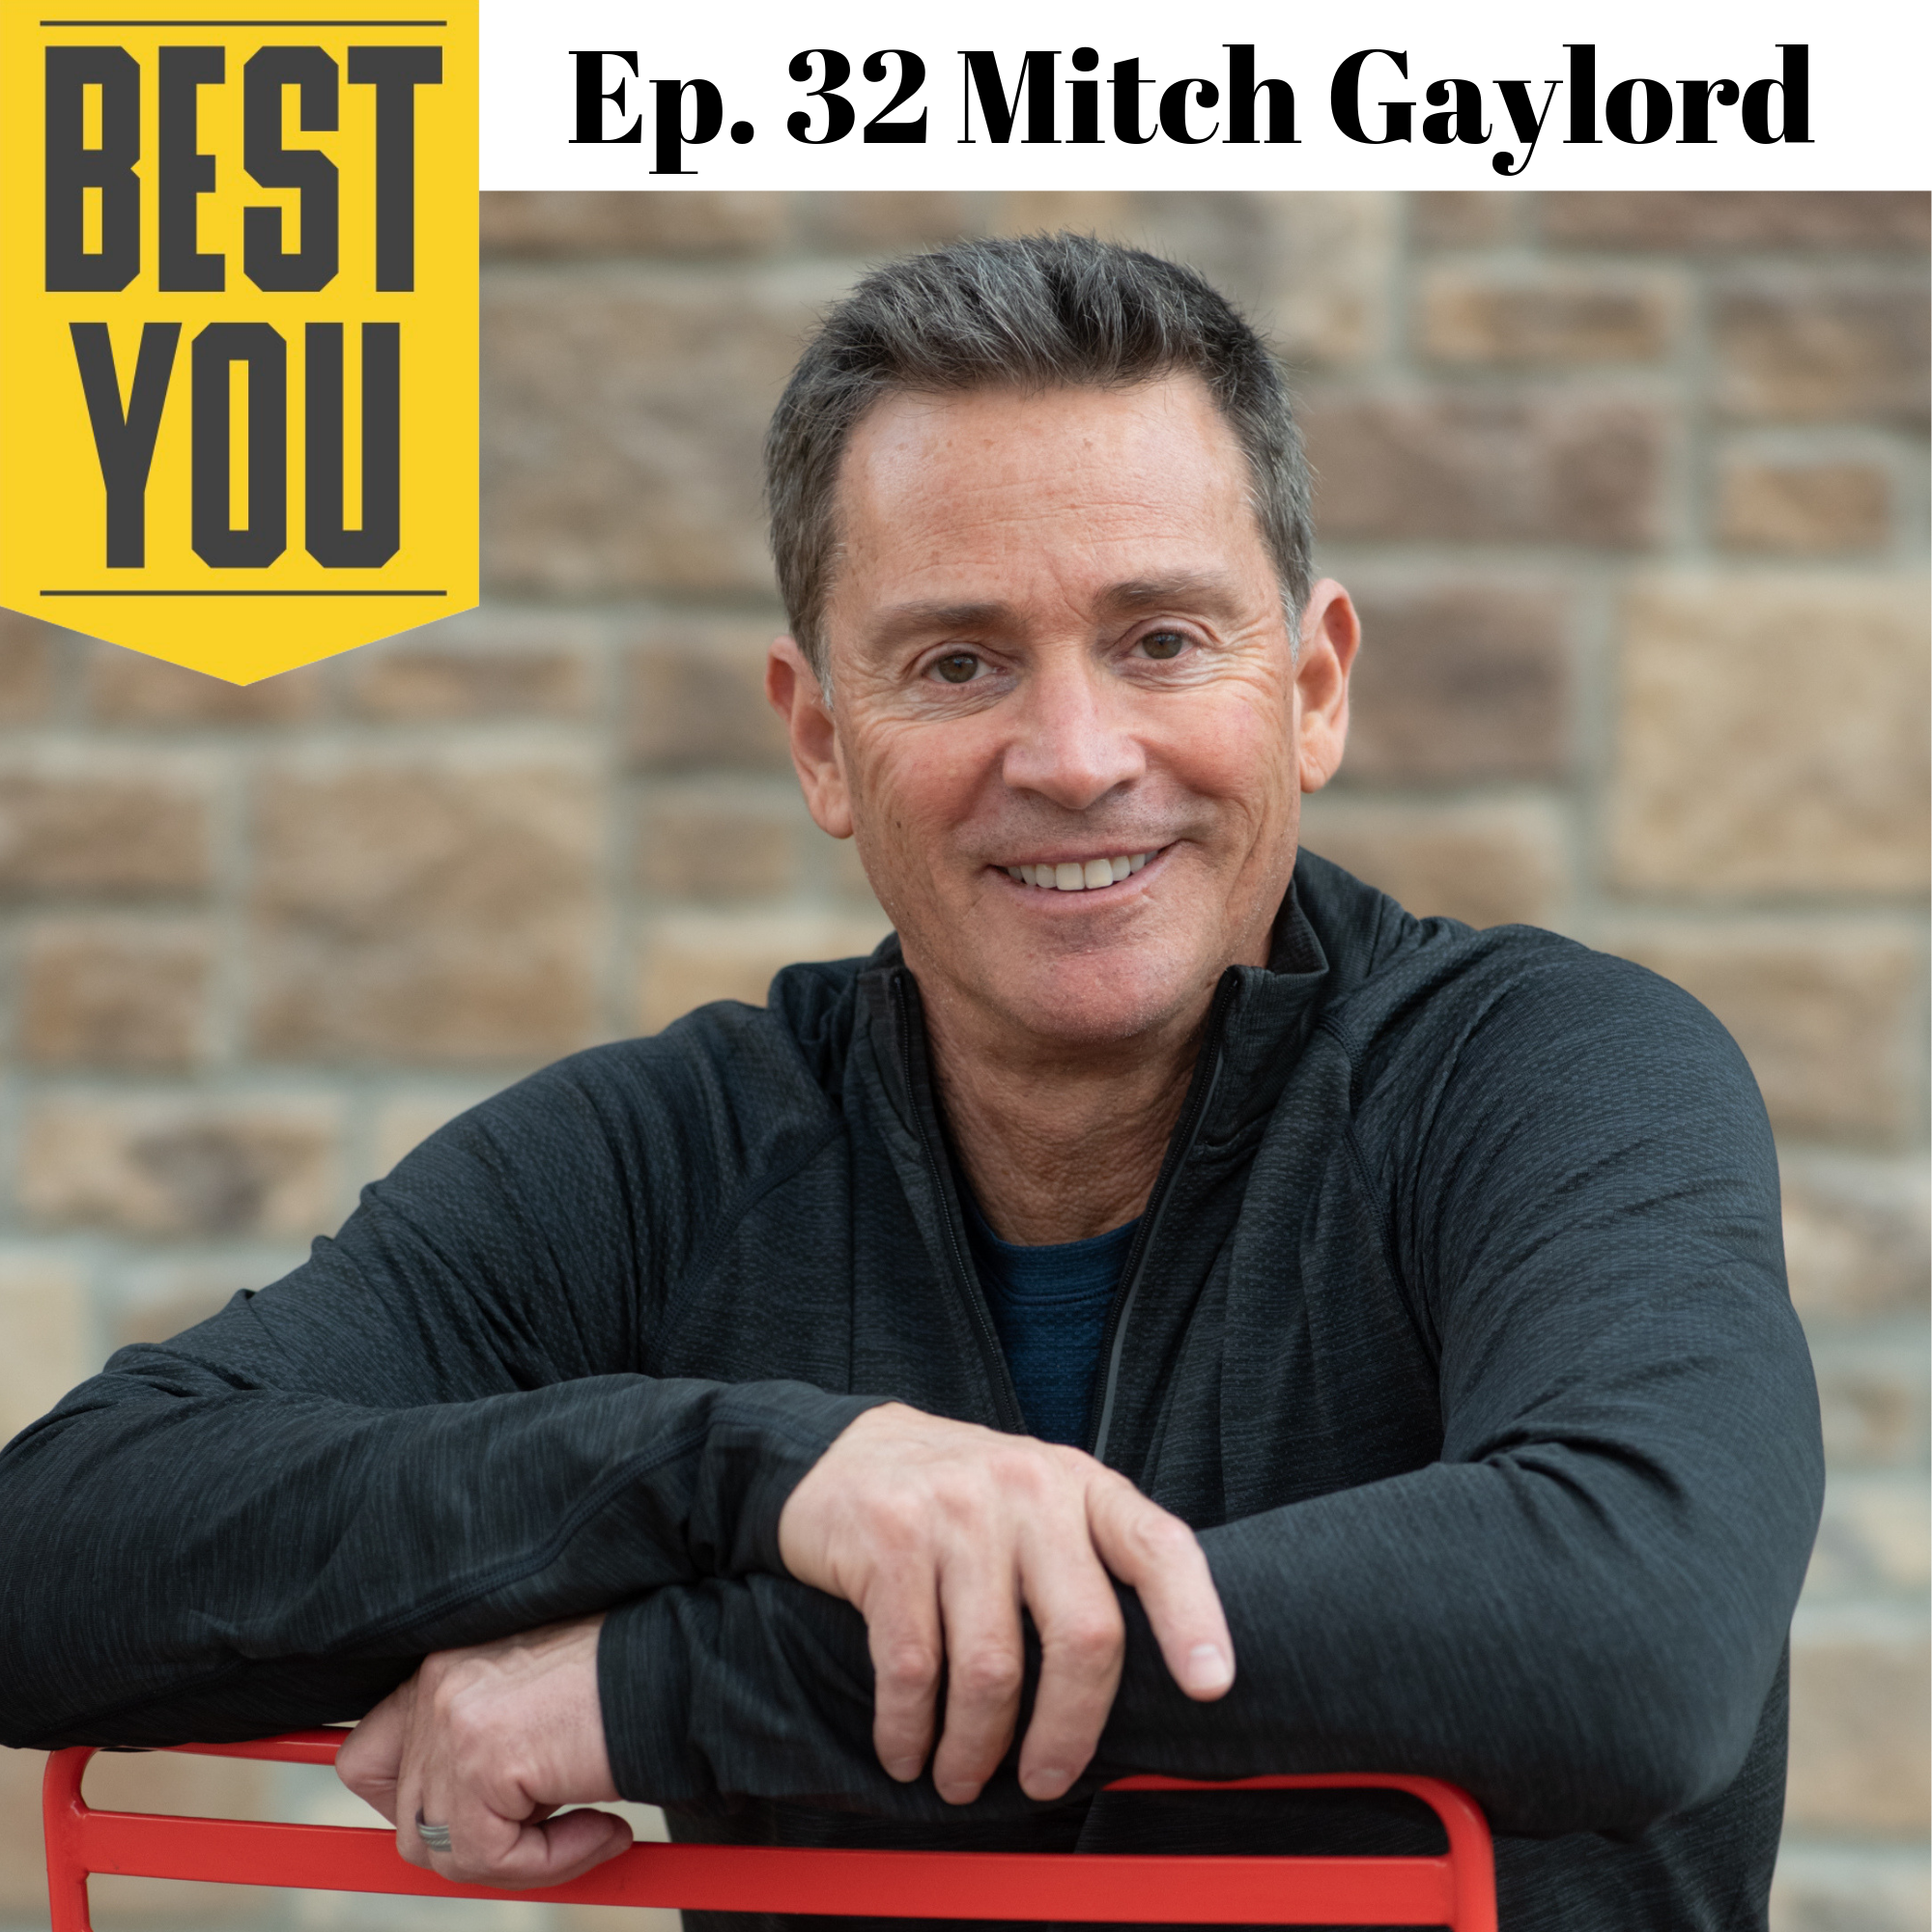 Ep. 63 Mitch Gaylord - Breaking Through the Mental Hurdle